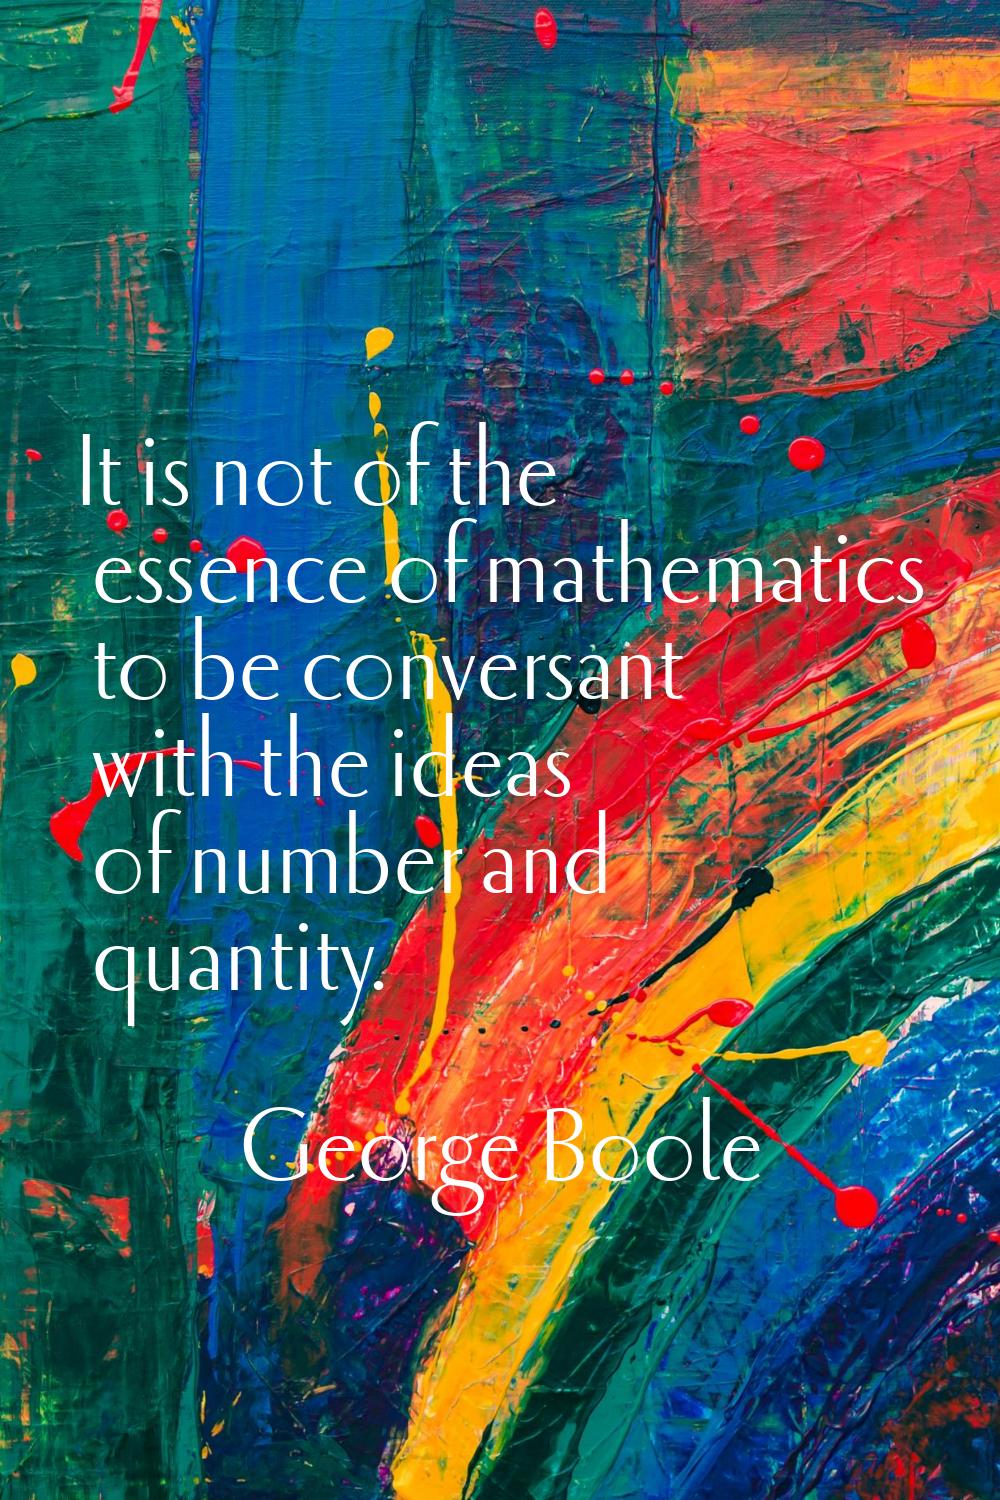 It is not of the essence of mathematics to be conversant with the ideas of number and quantity.